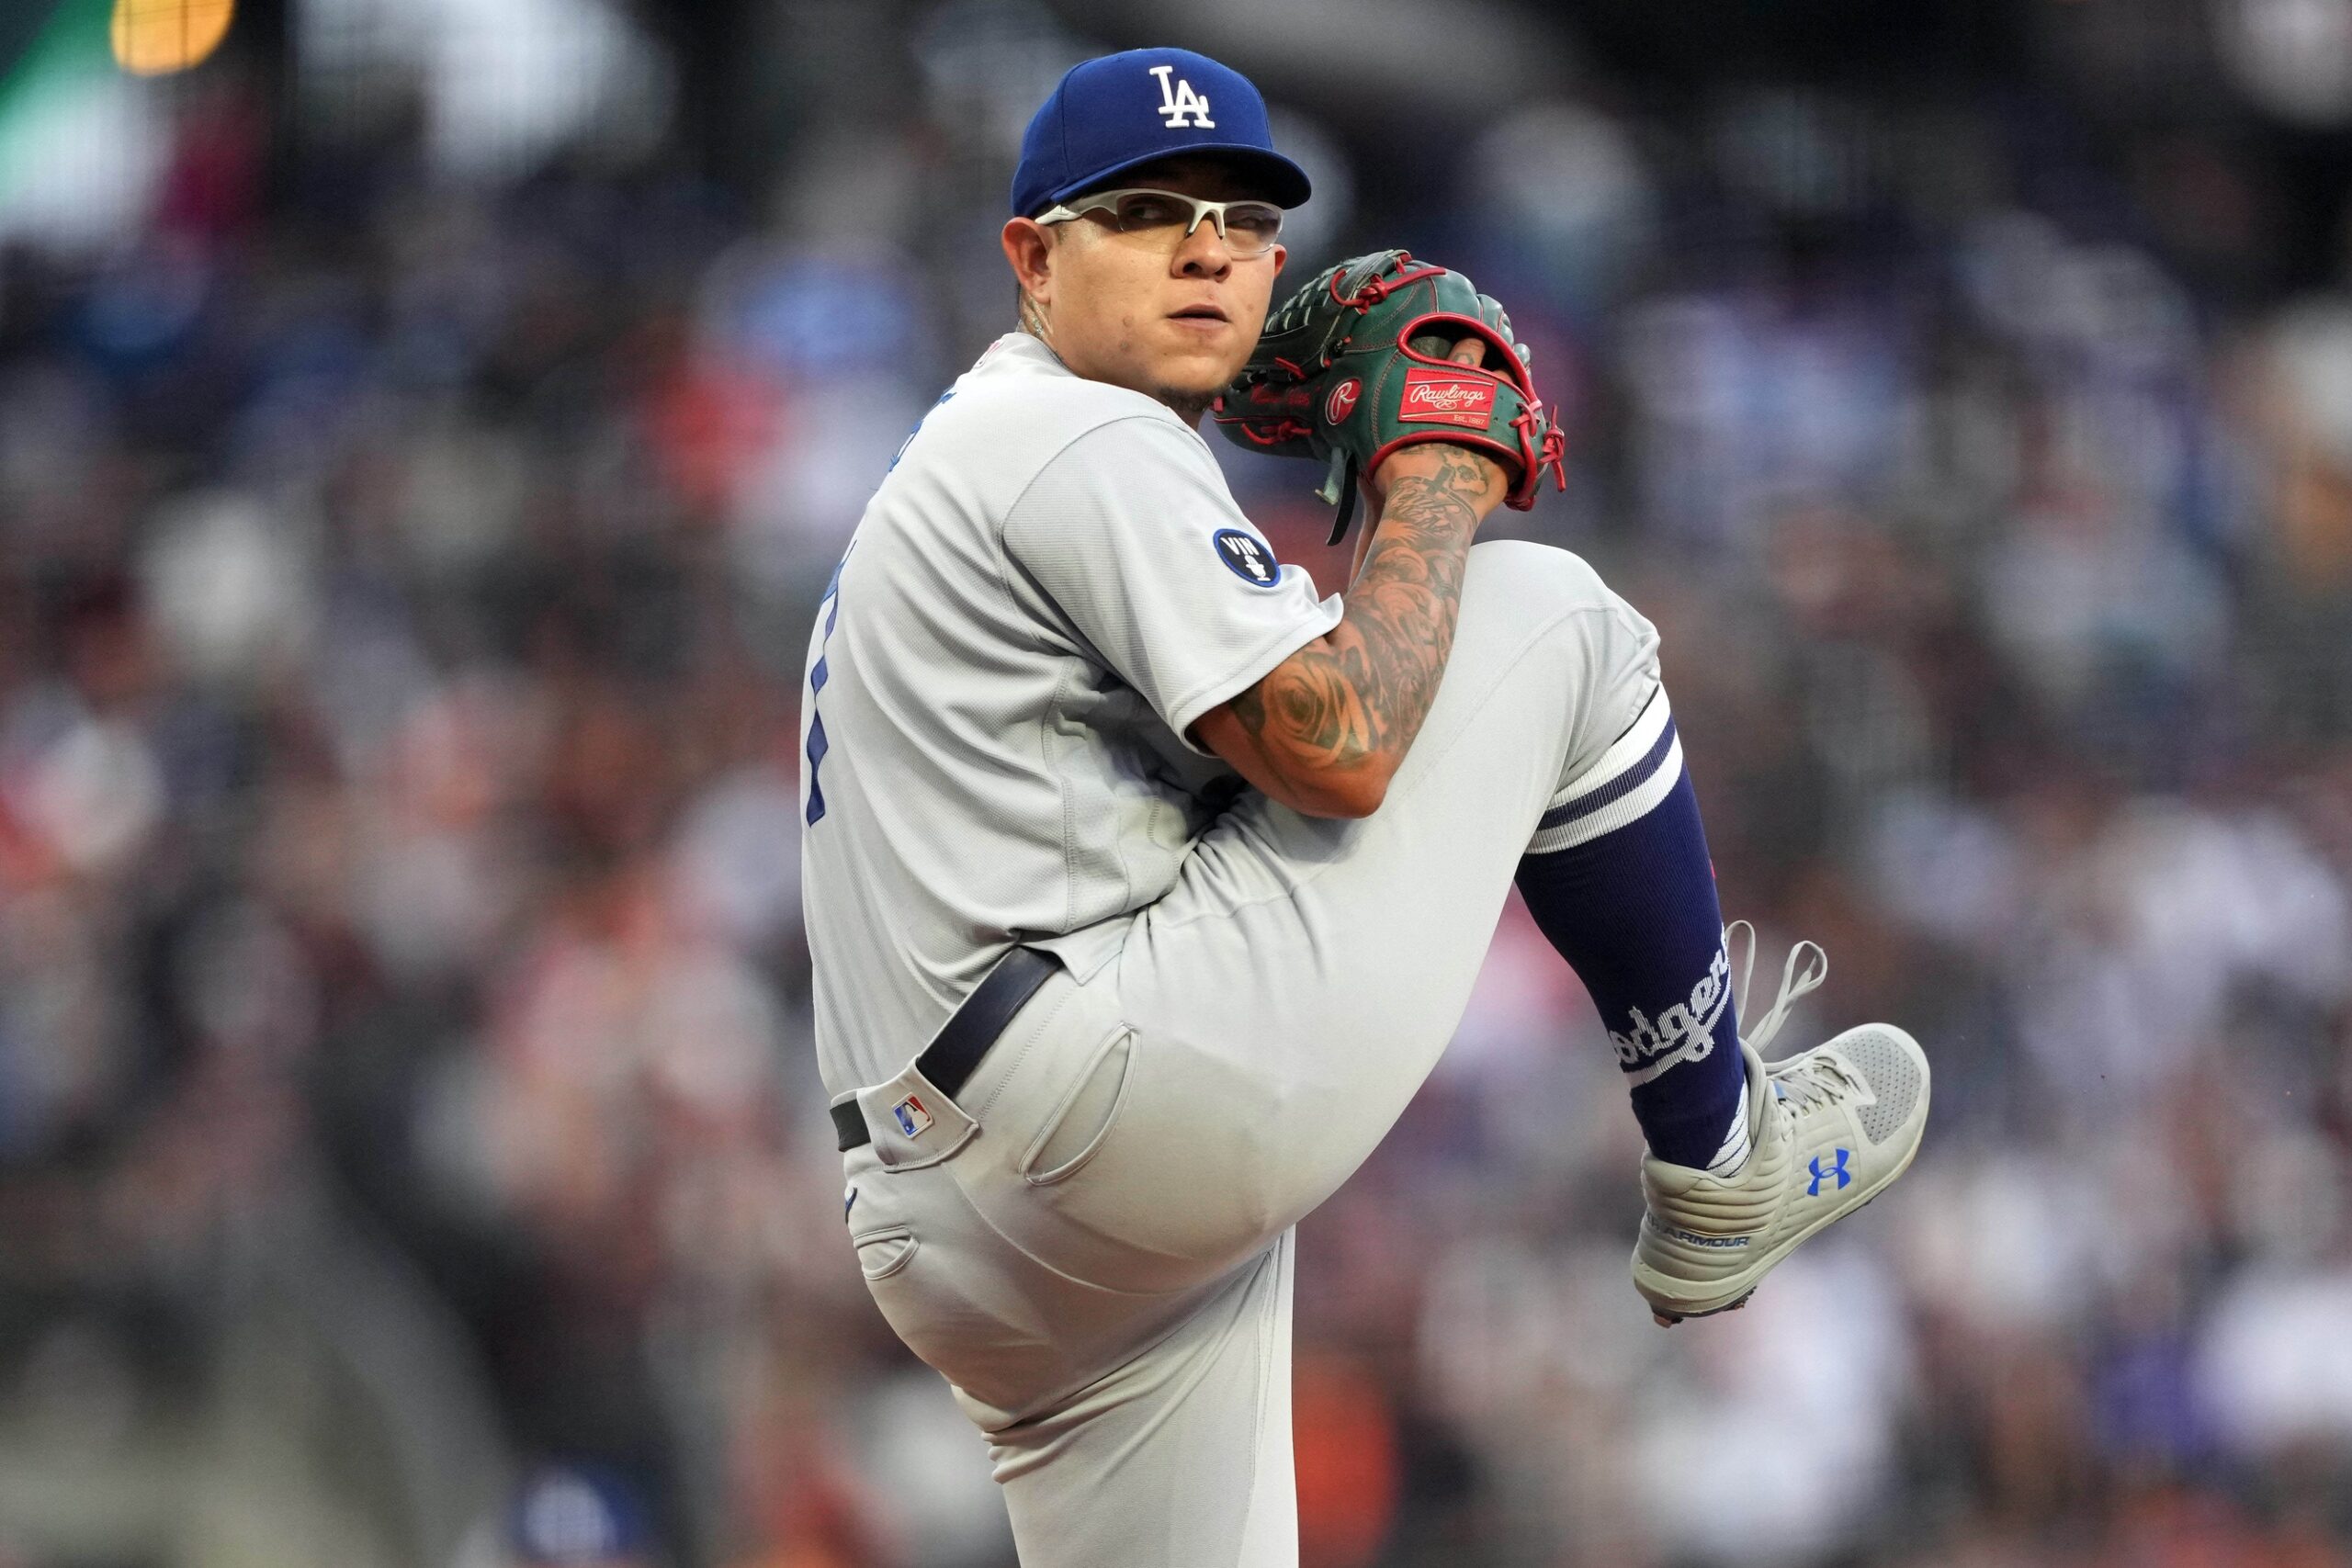 Julio Urias: when will he make his first appearance in the 2022